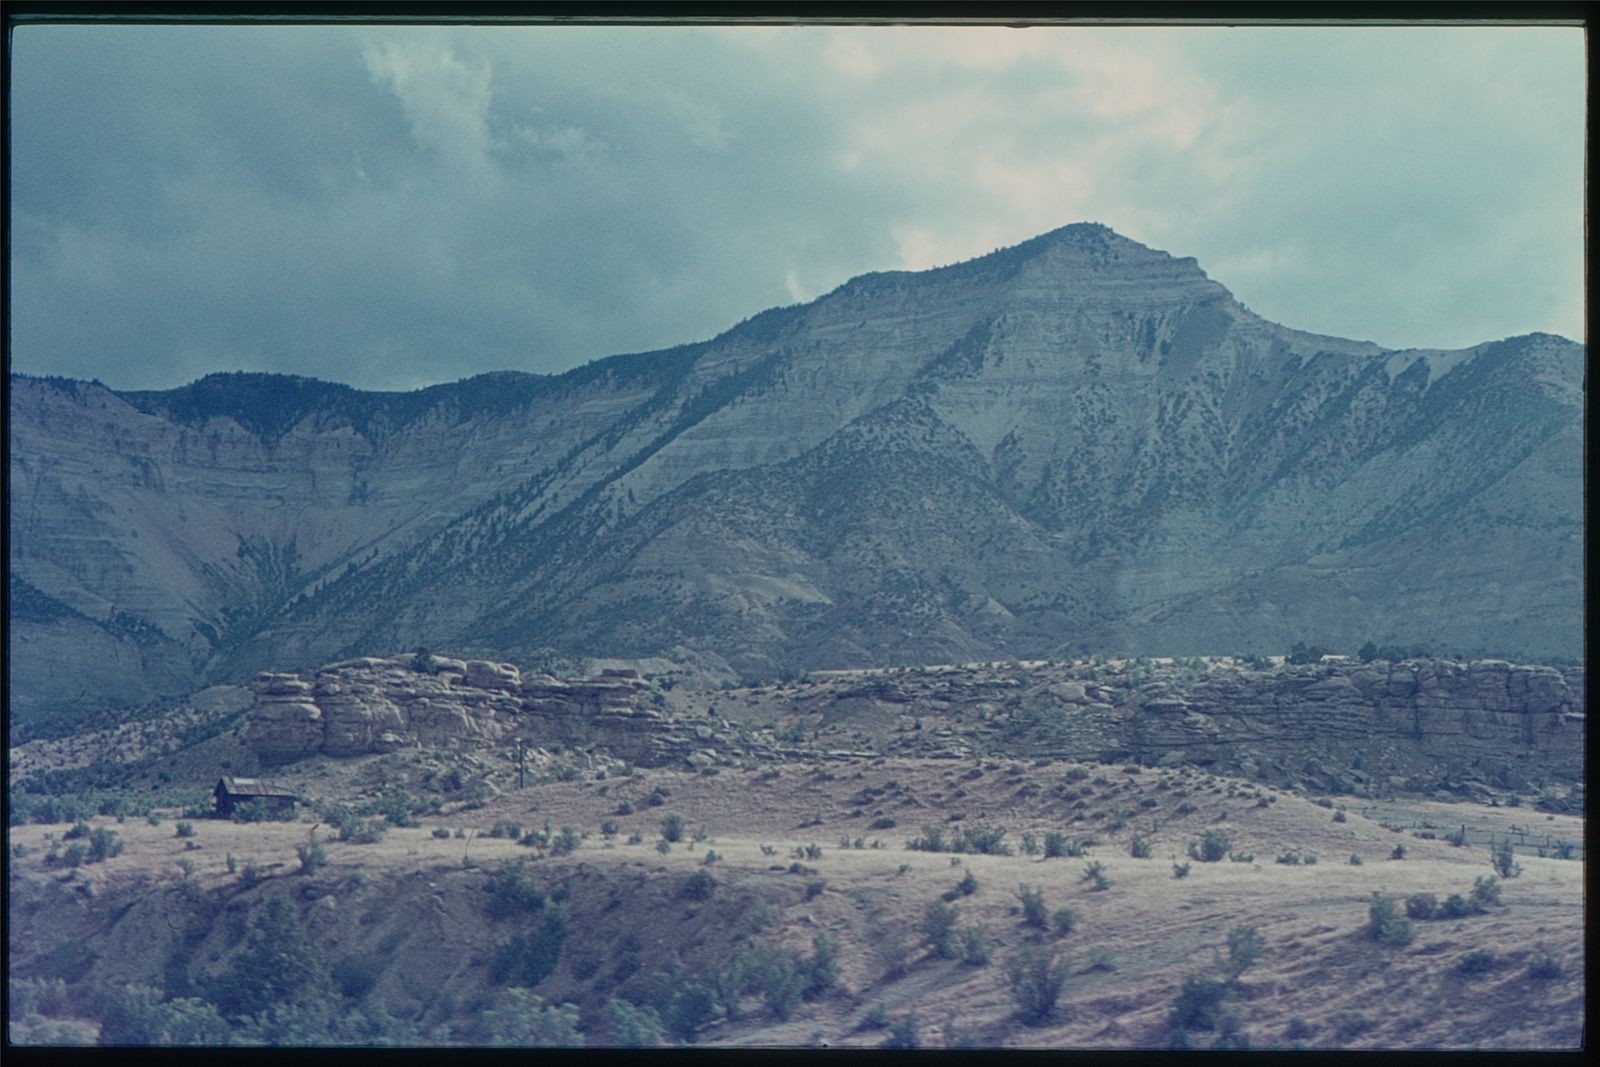 © Anne Ackermann - The Western Mountains. An image from my dad's archive taken during a trip through the USA, ca. 1974.